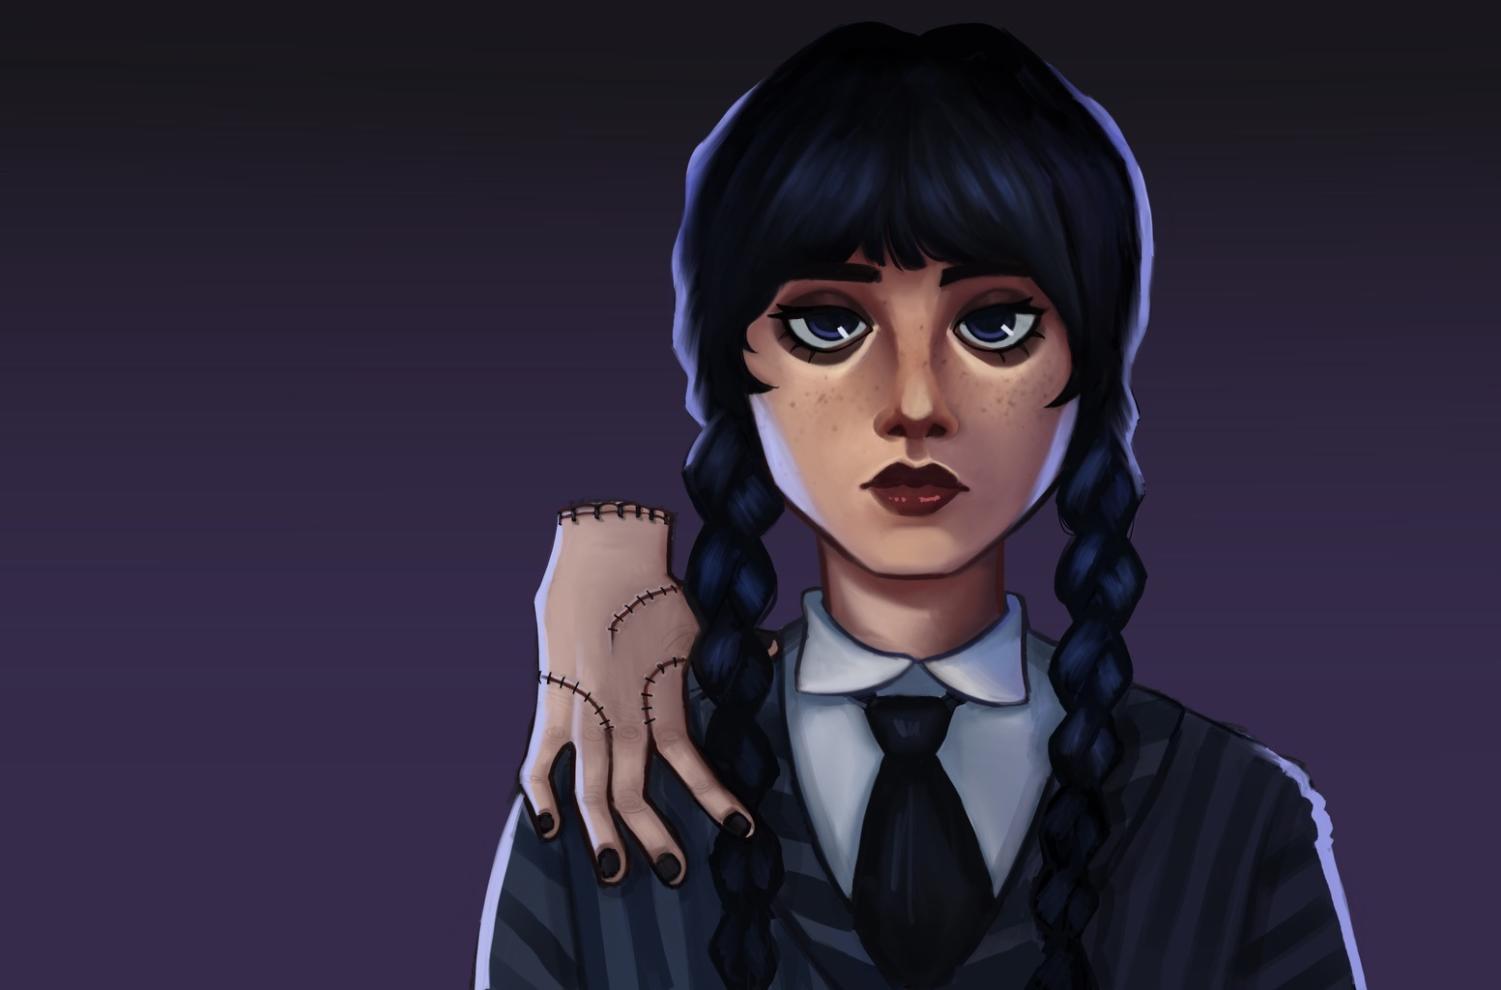 Wednesday Addams is Taking Pop Culture by Storm